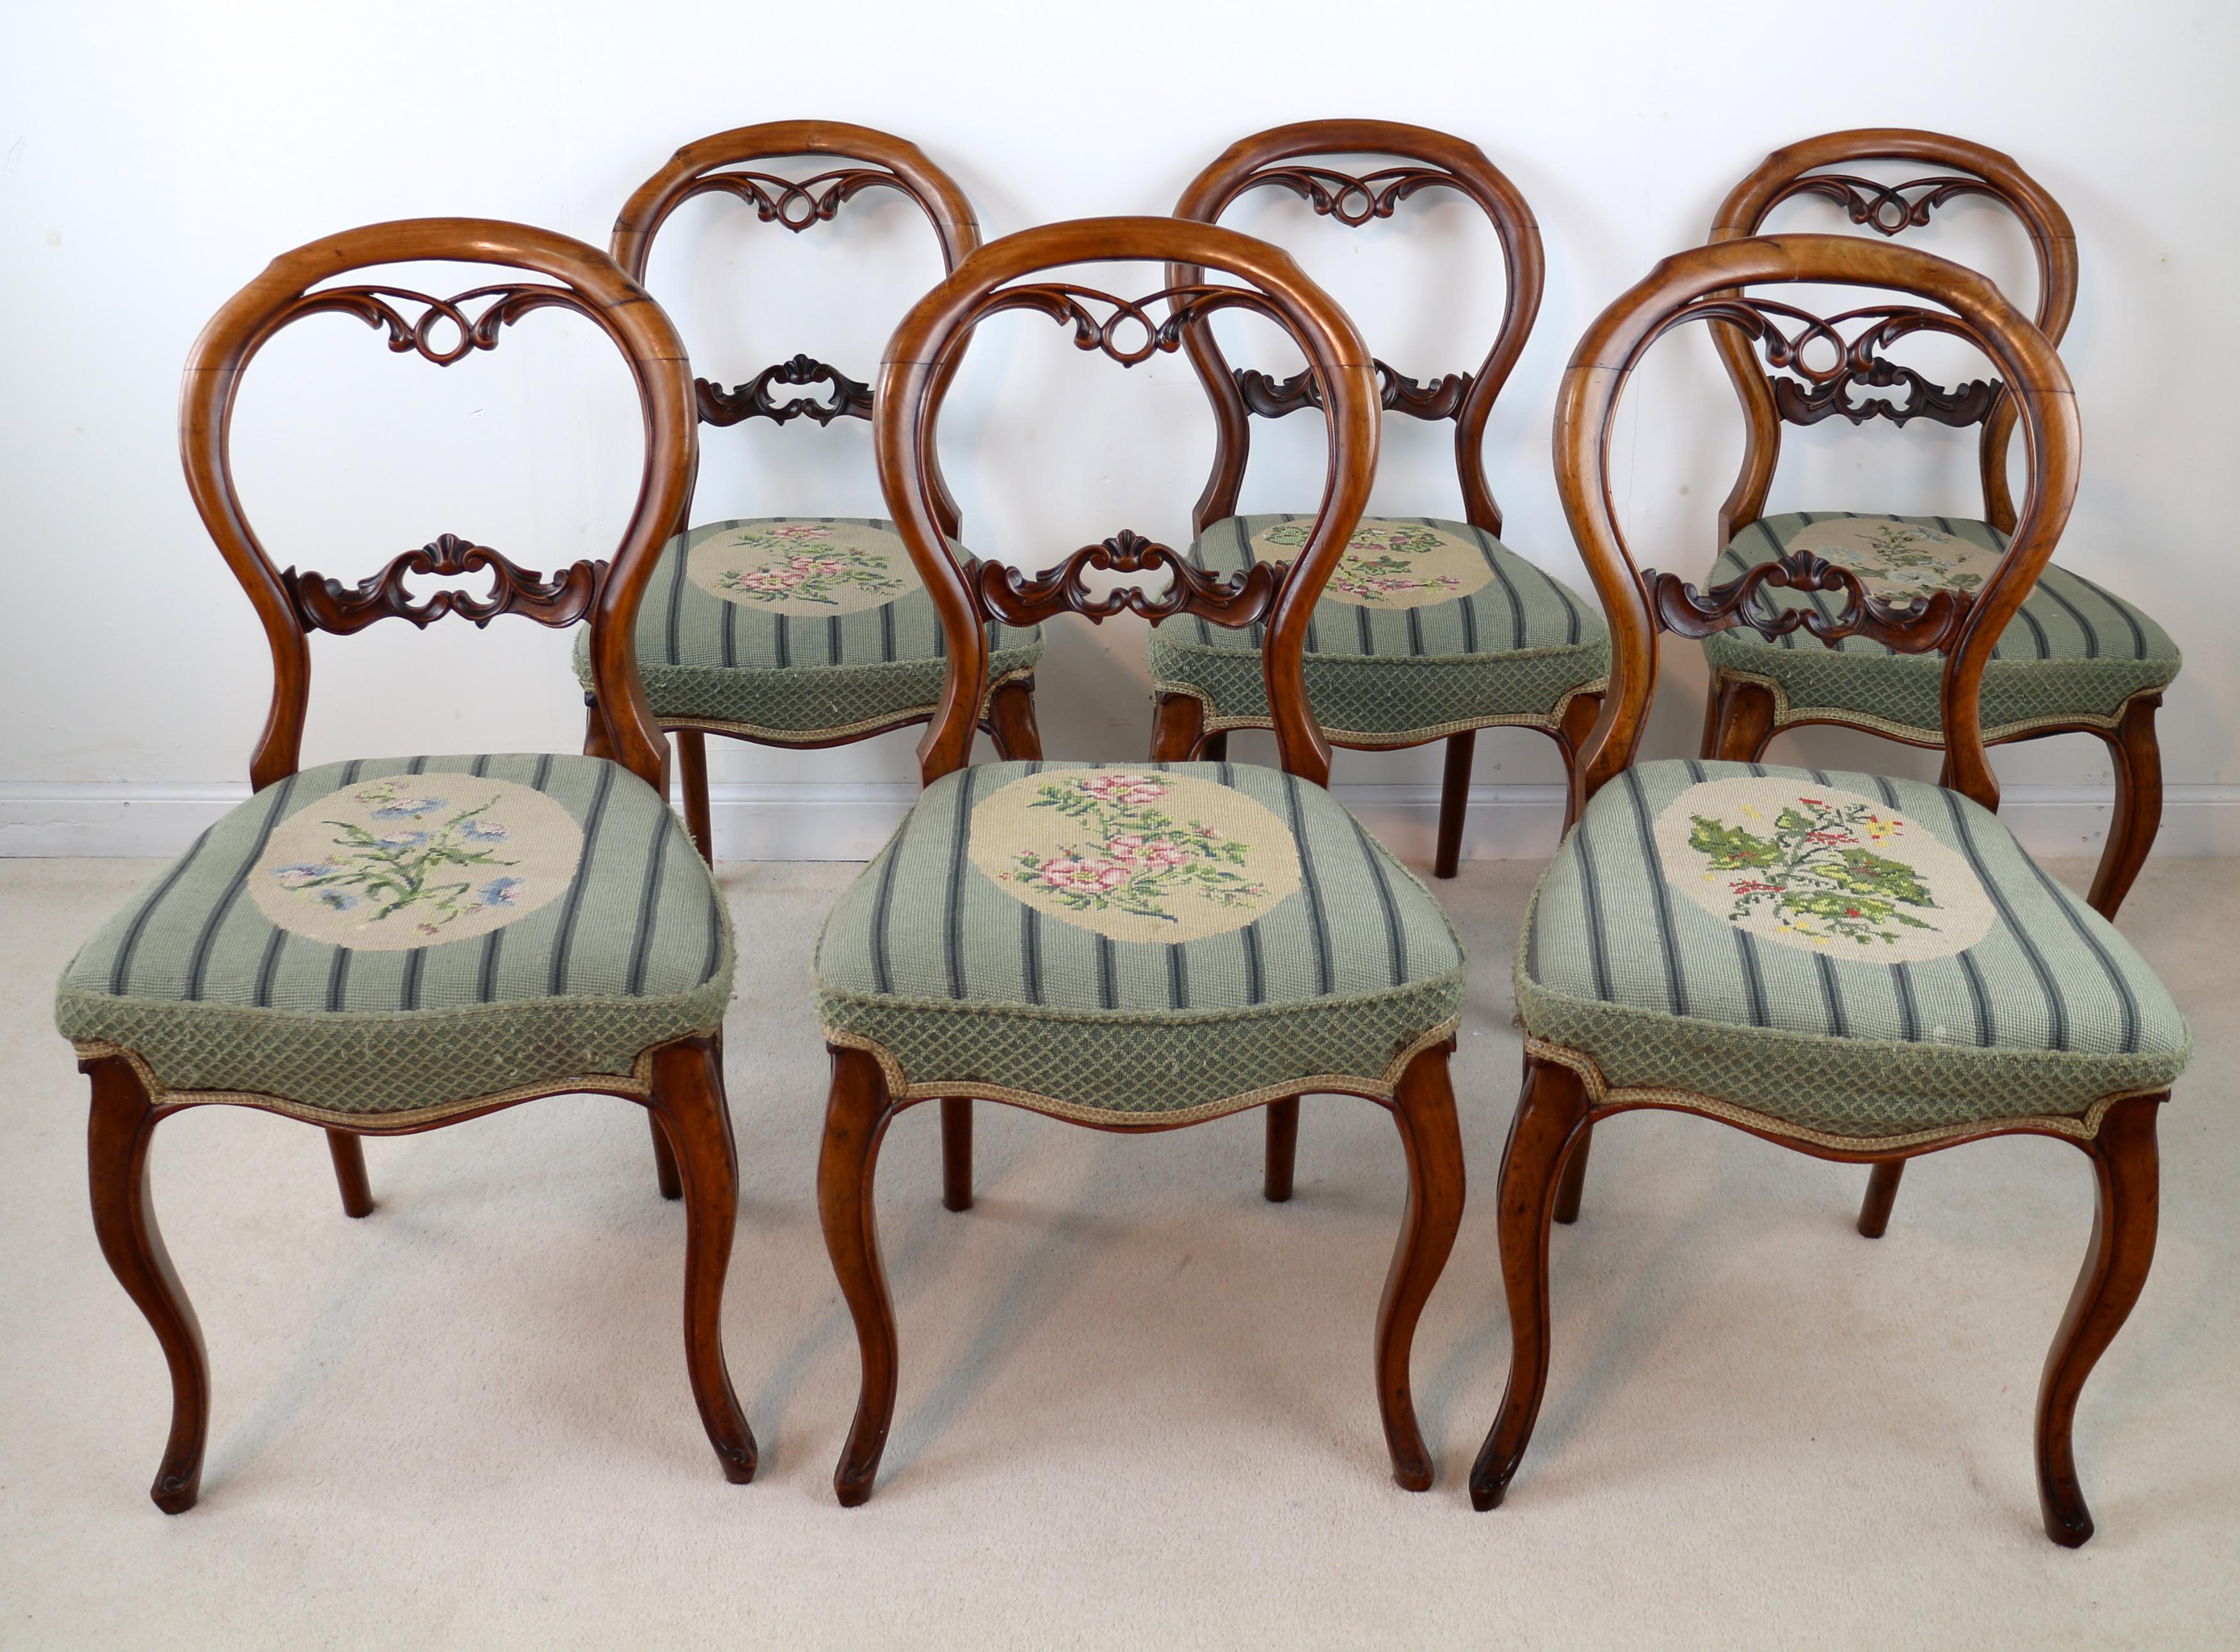 A super original set of six Victorian walnut balloon back dining chairs dating to around 1860. With decorative pierced and carved backs above gros-point floral needlework seats and on cabriole legs. These are good examples of this attractive style